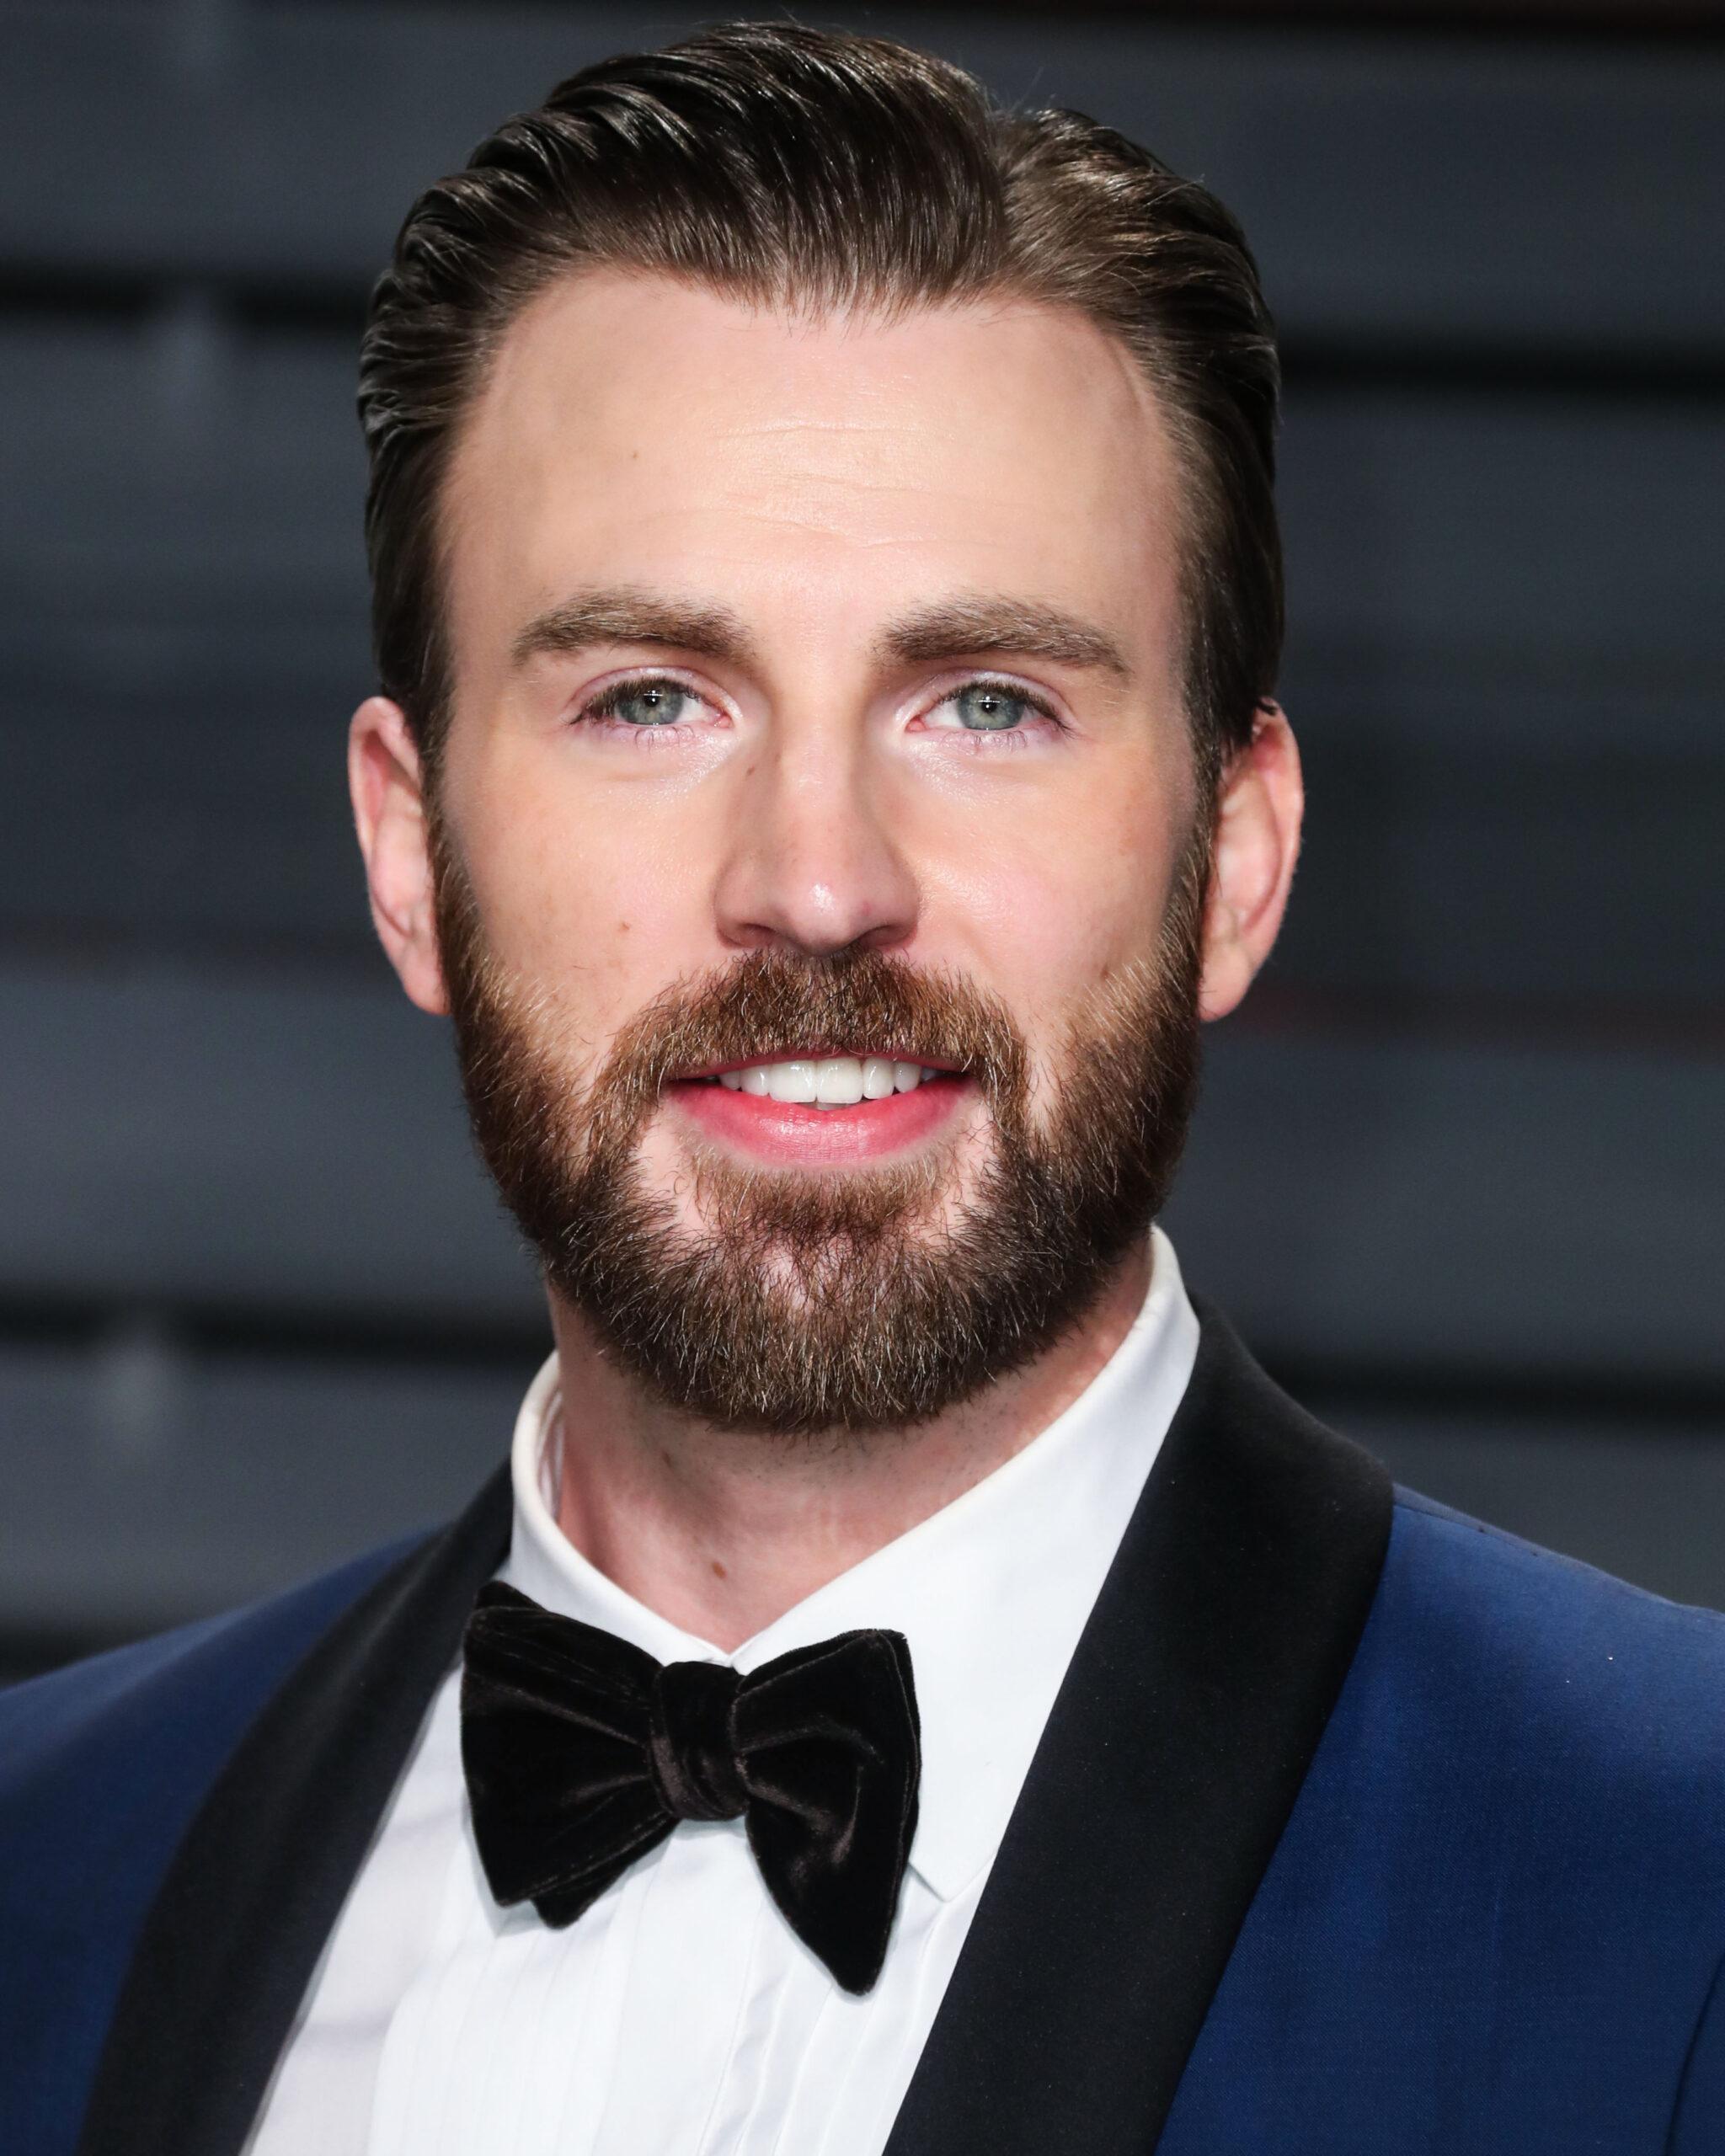 A photo showing Chris Evans sporting a dark blue suit, with a white inner T-shirt and black bow tie at an event.